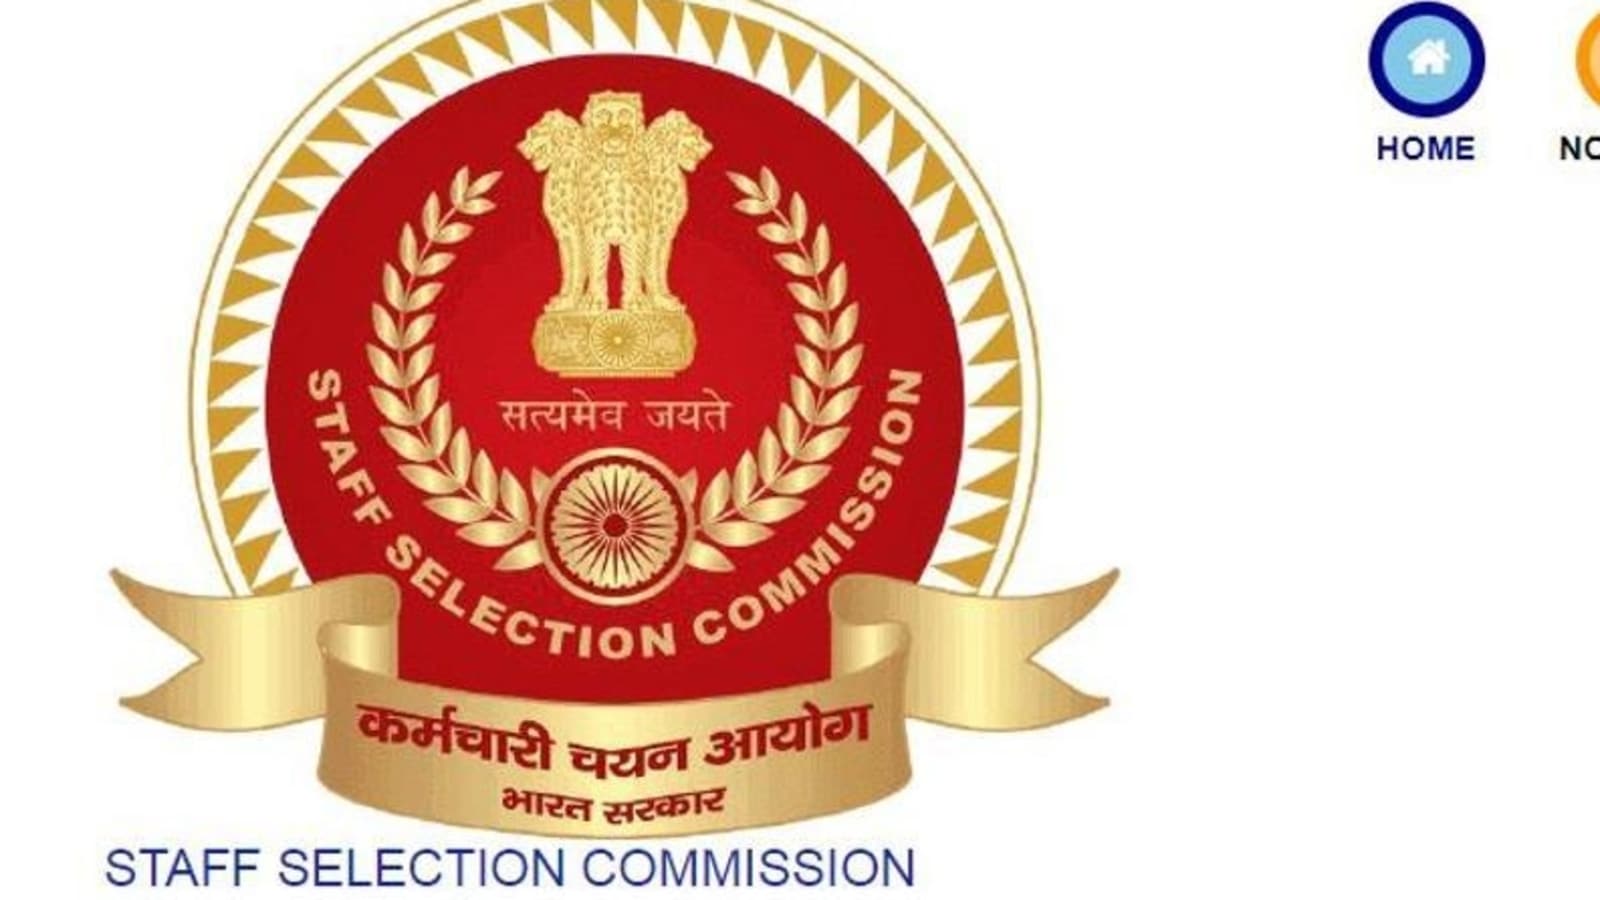 SSC CHSL admit card released for skill test, direct link here